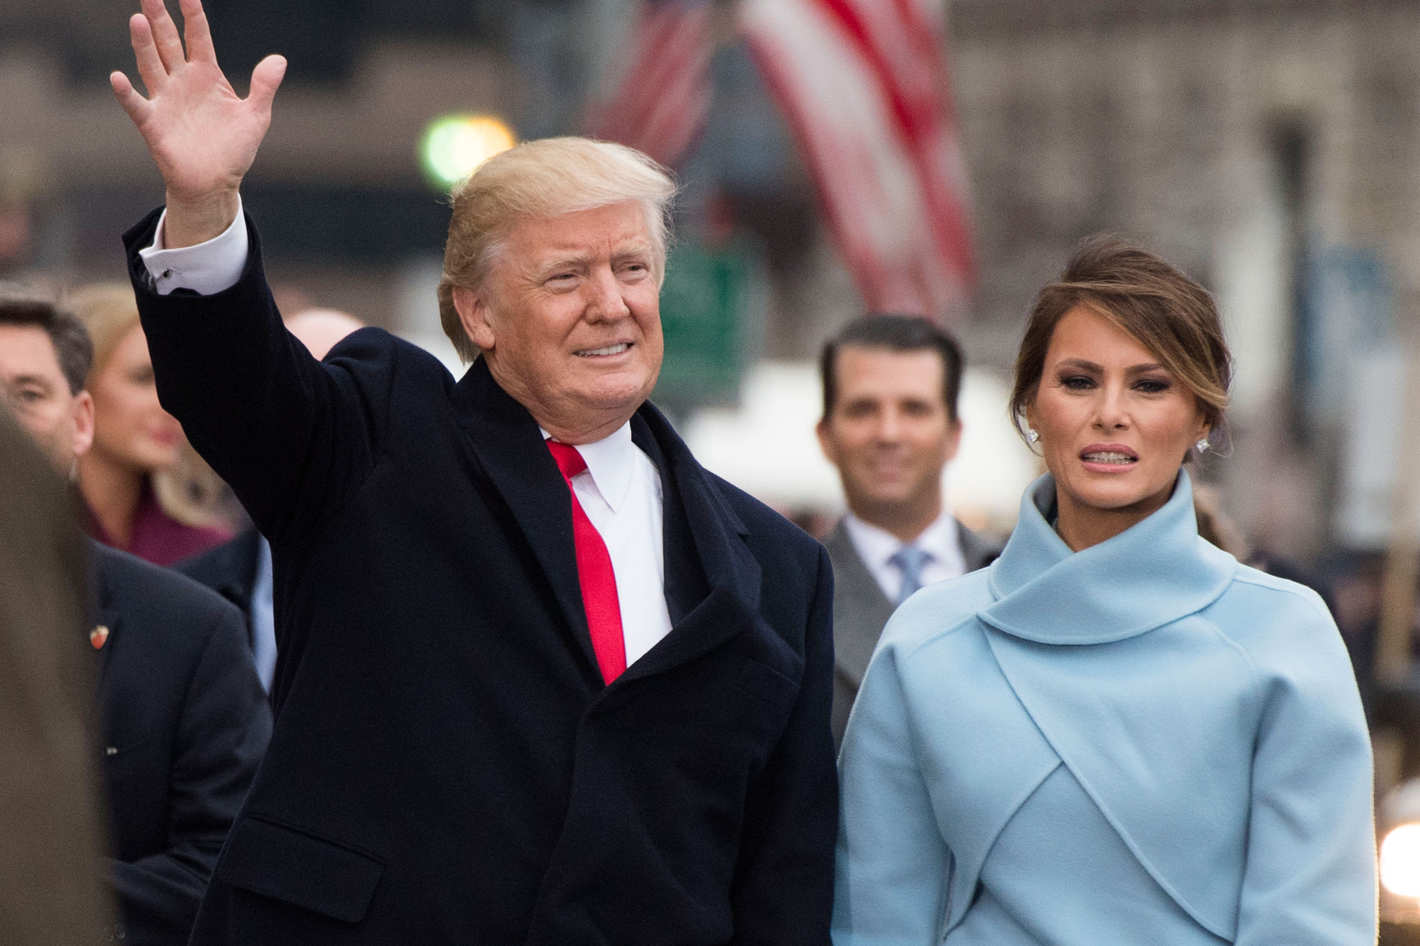 Melania Trump and husband, Donald Trump on January 21, 2017 at the inauguration of the 45th president of the United States. | Getty Images